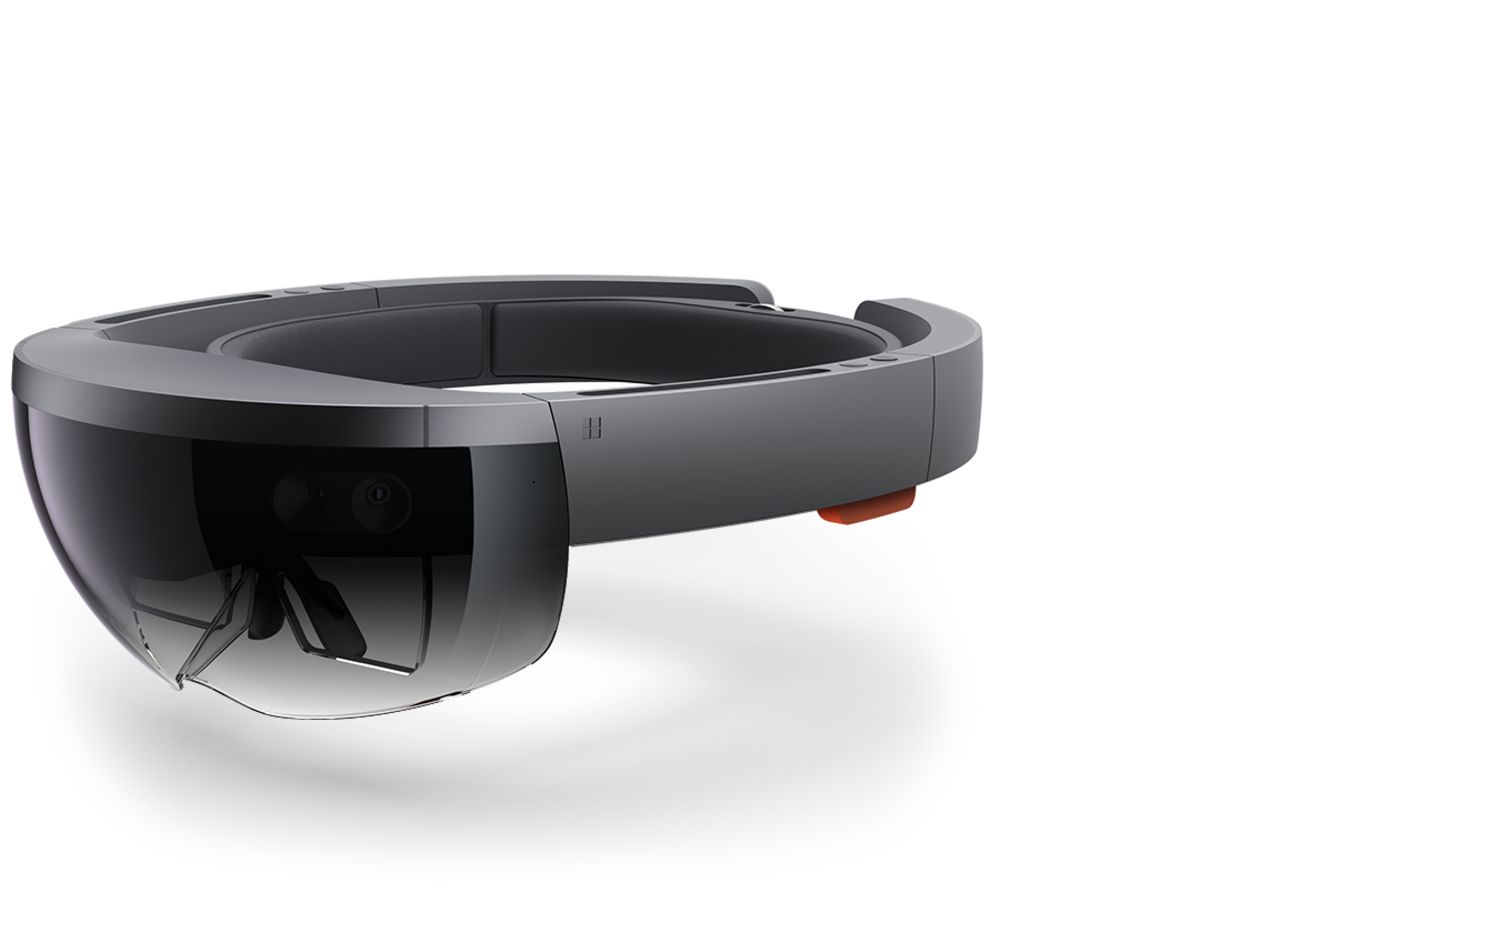 How Microsoft’s HoloLens Is Game Changer